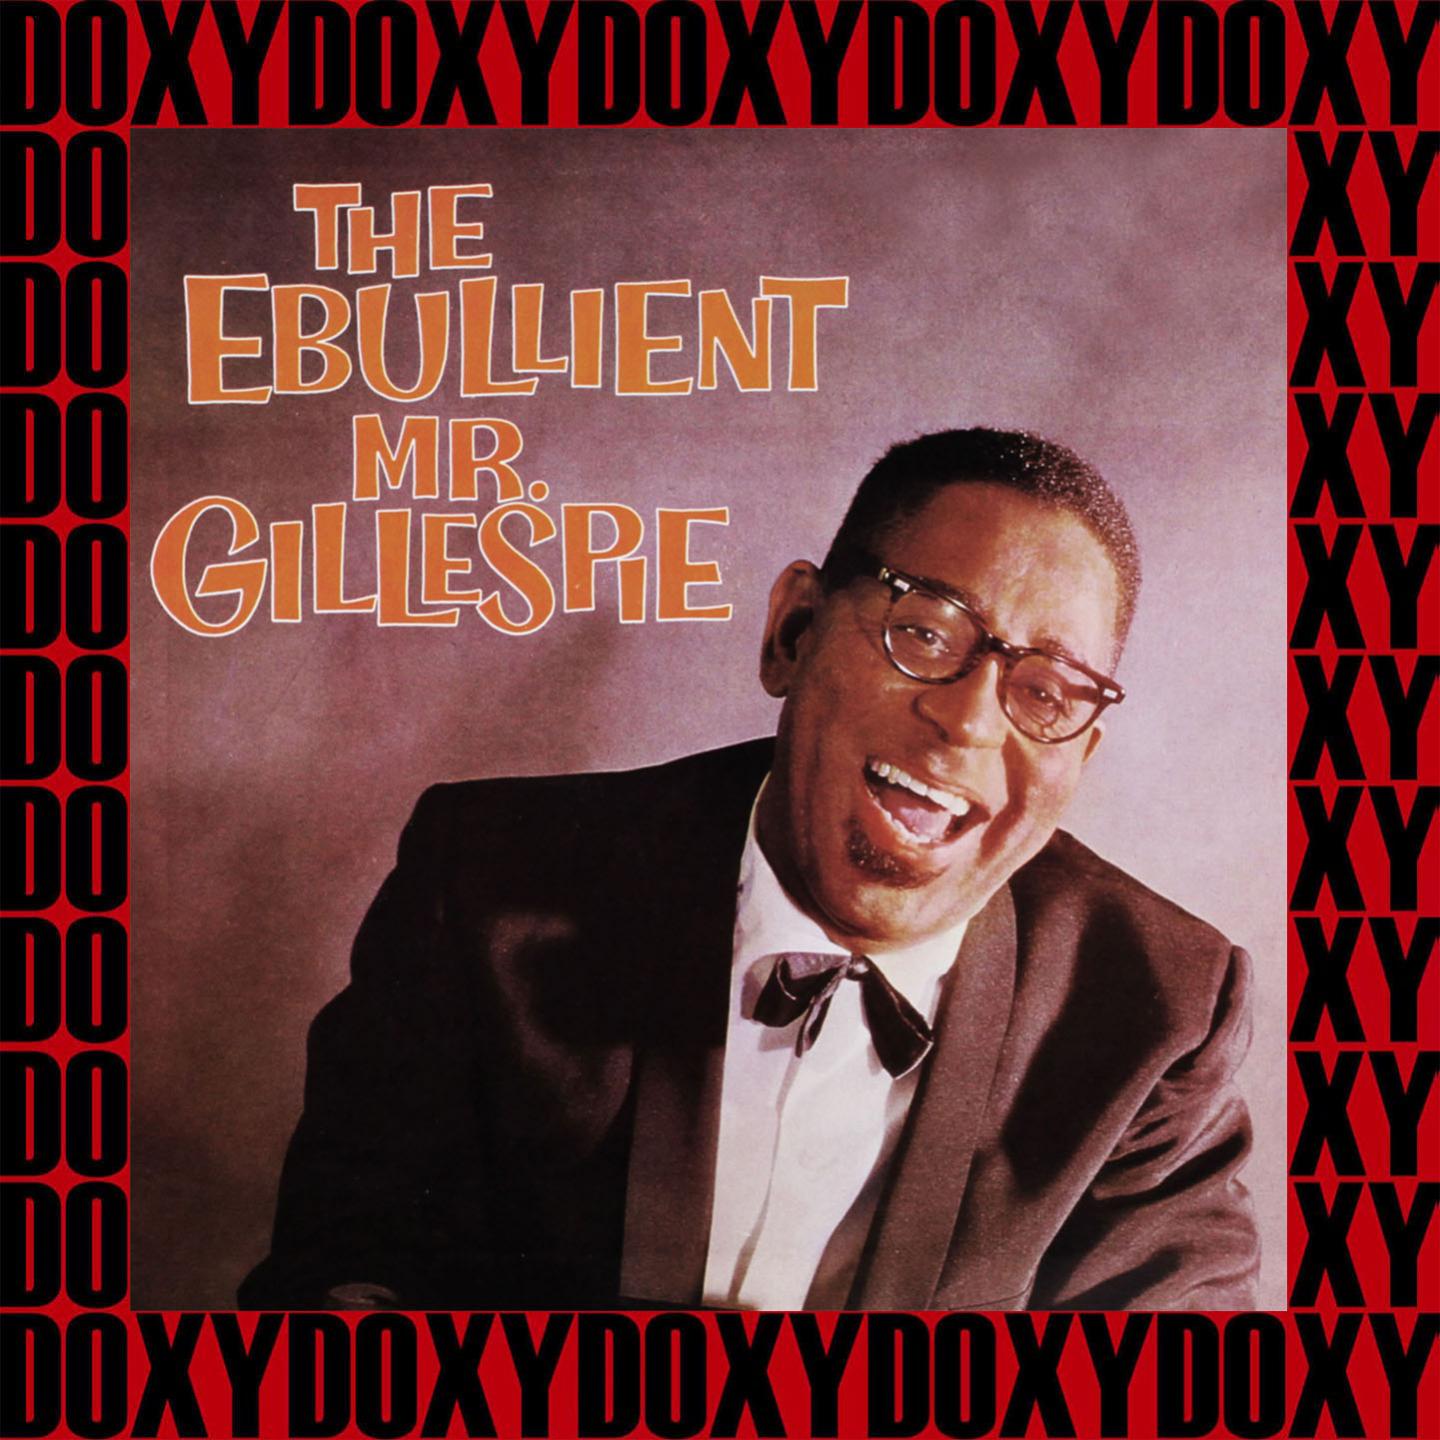 The Ebullient Mr. Gillespie (Remastered Version) (Doxy Collection)